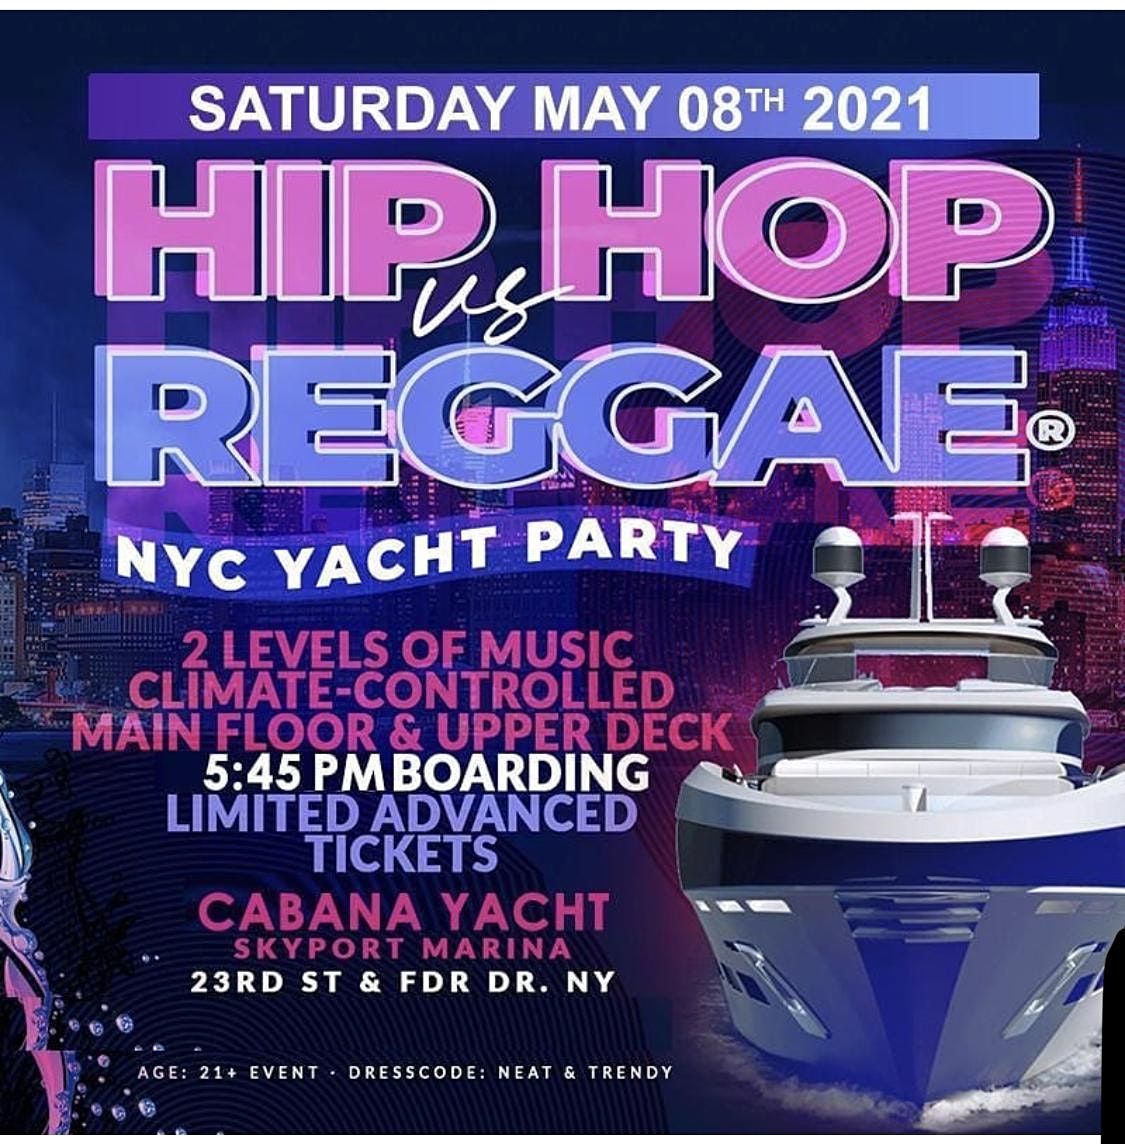 MIDNIGHT YACHT PARTY NYC! Sat., August 28th